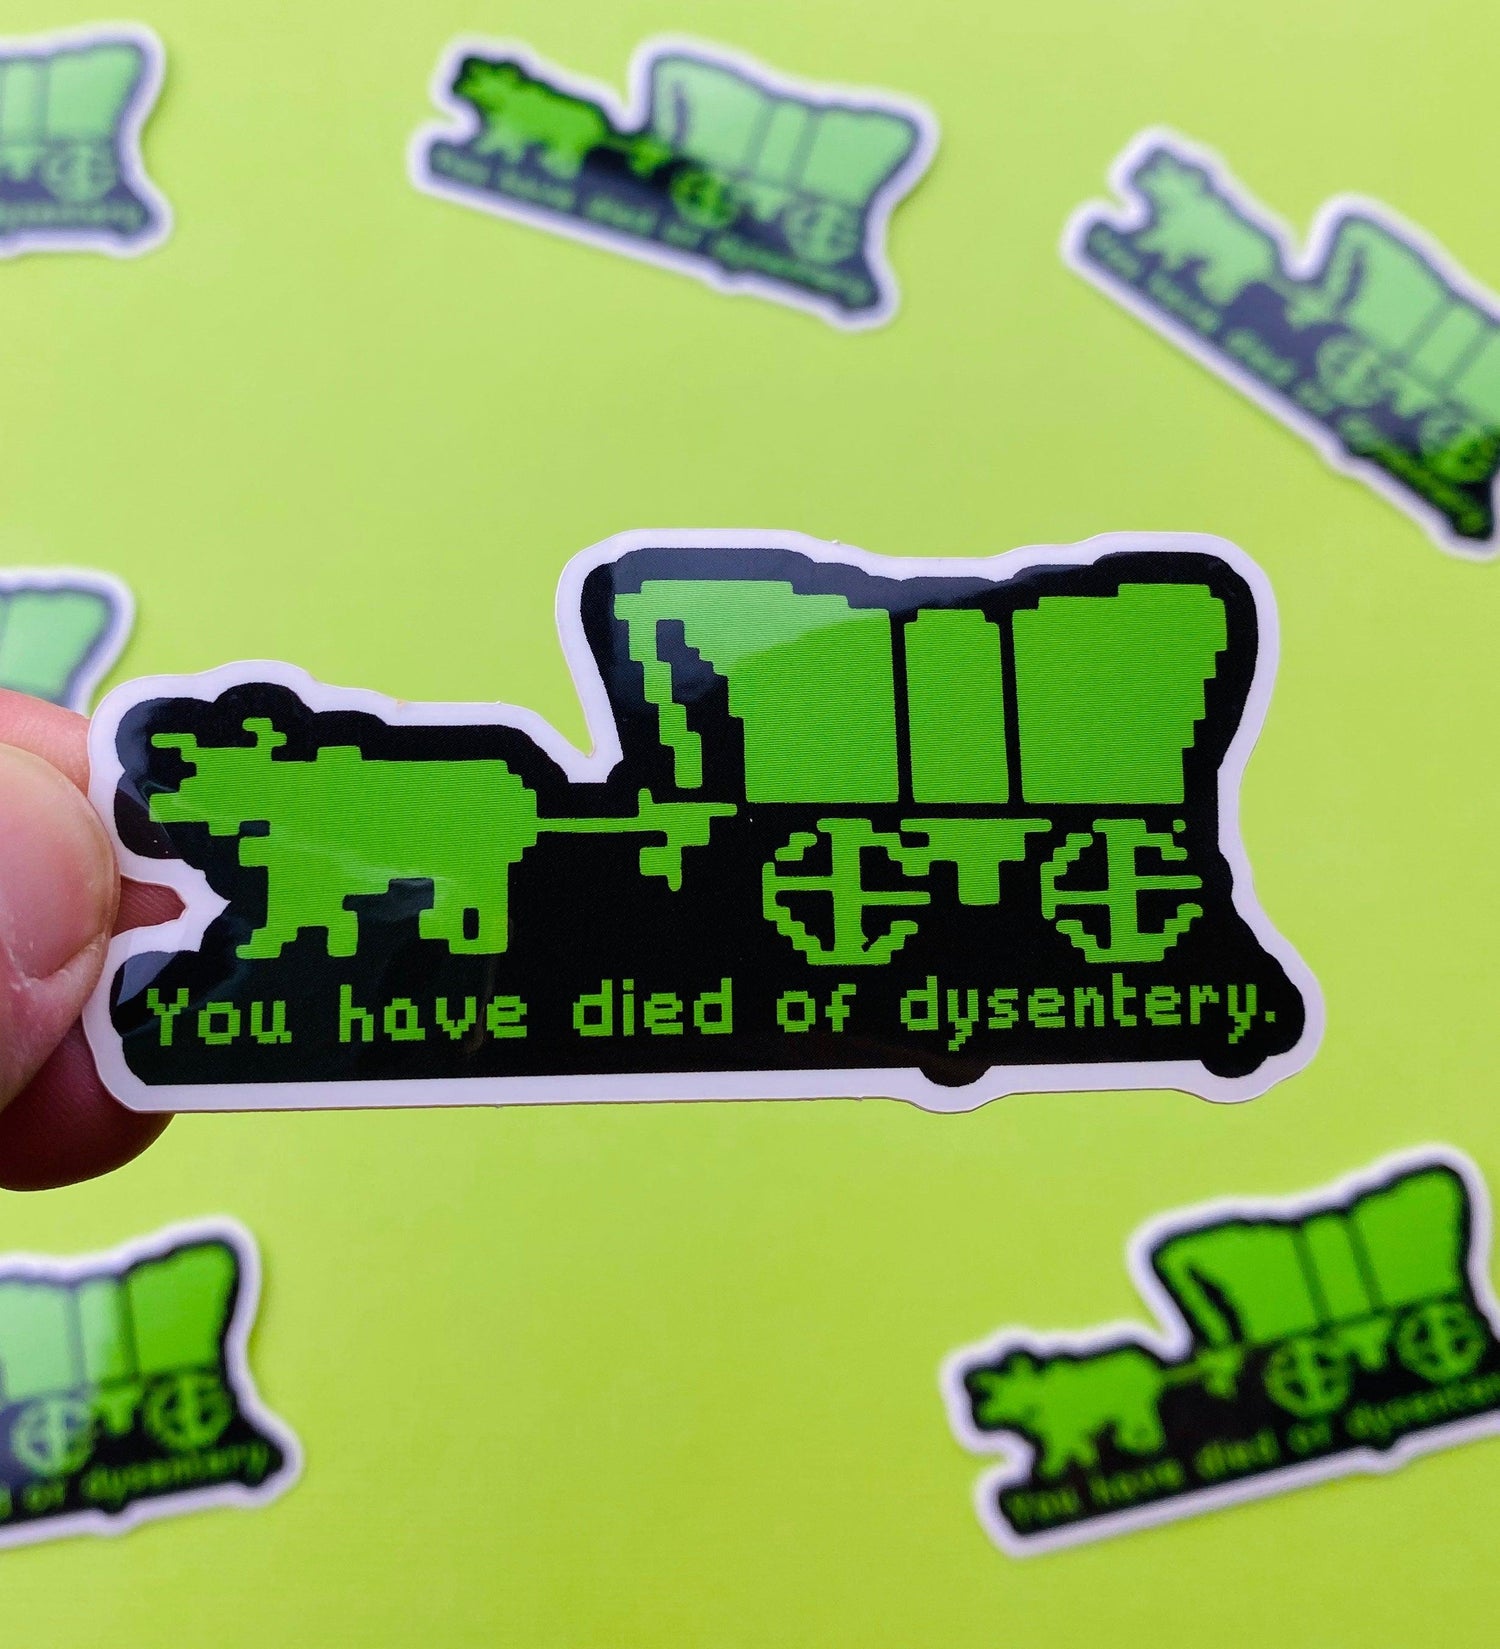 Oregon Trail Sticker Eighties Sticker 1980s Sticker Retro Gaming Sticker Funny Decal for Eighties Kids - Ottos Grotto :: Stickers For Your Stuff